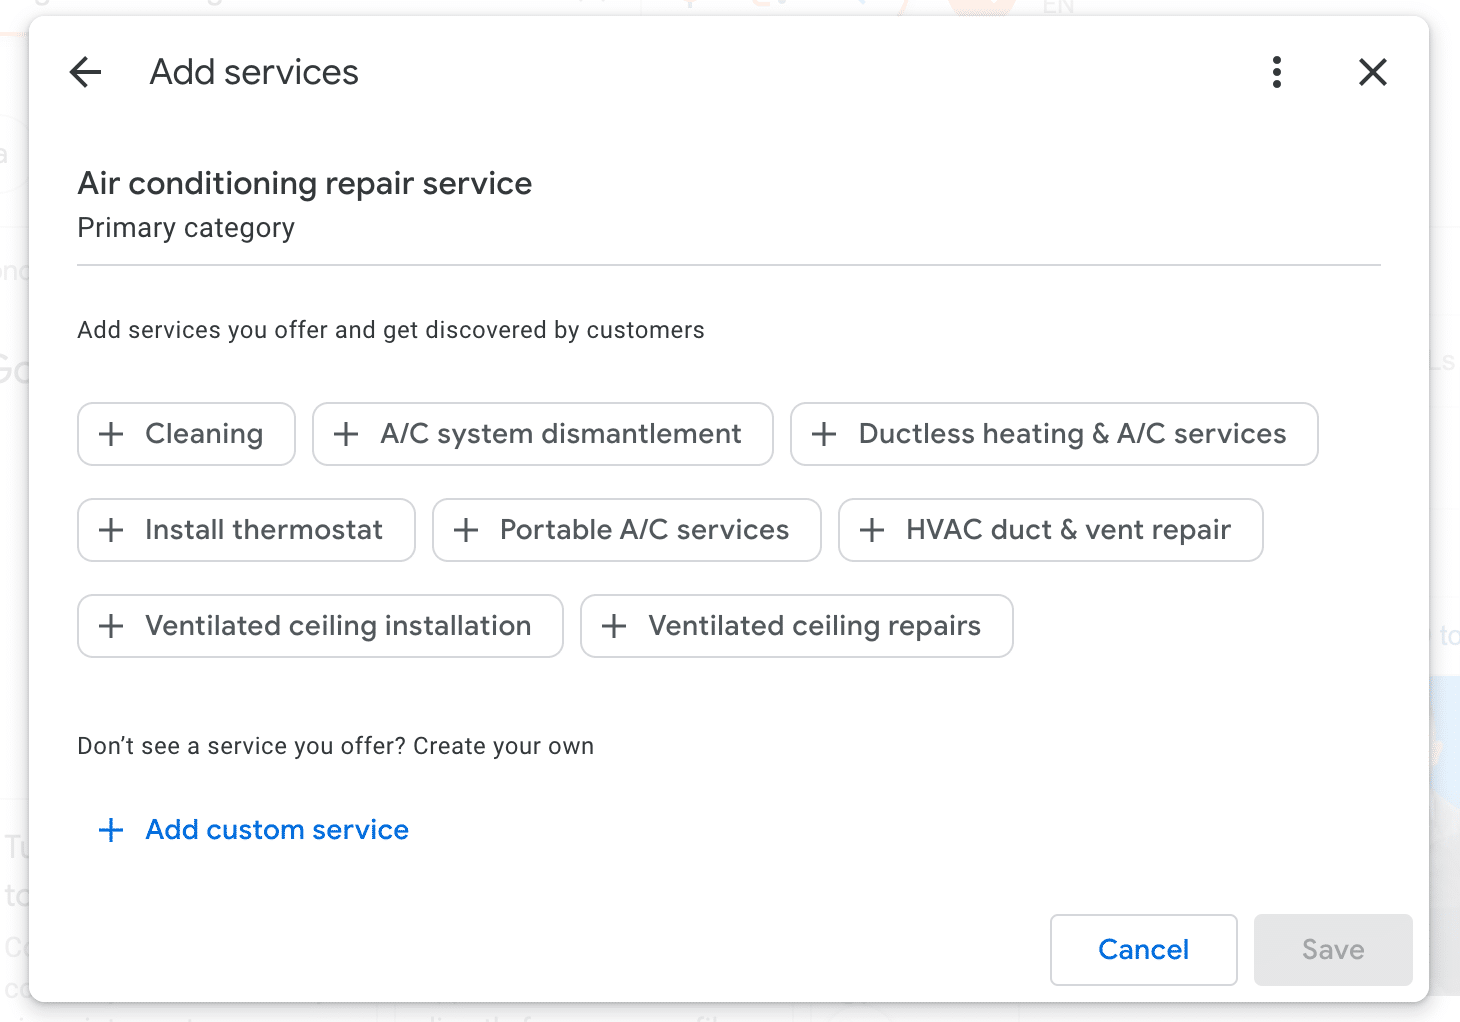 GBP - Add services